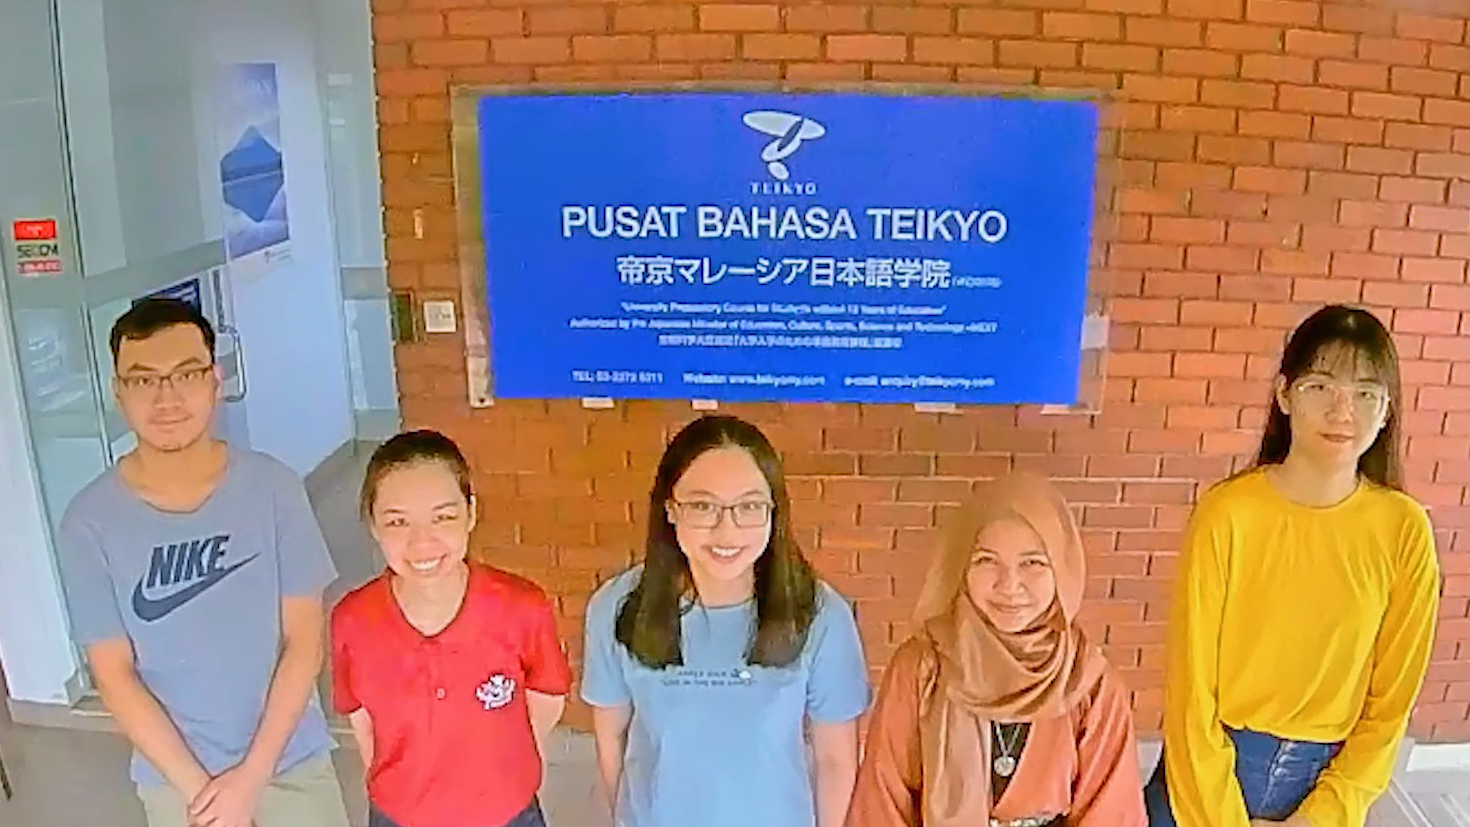 Why Study in Pusat Bahasa Teikyo?